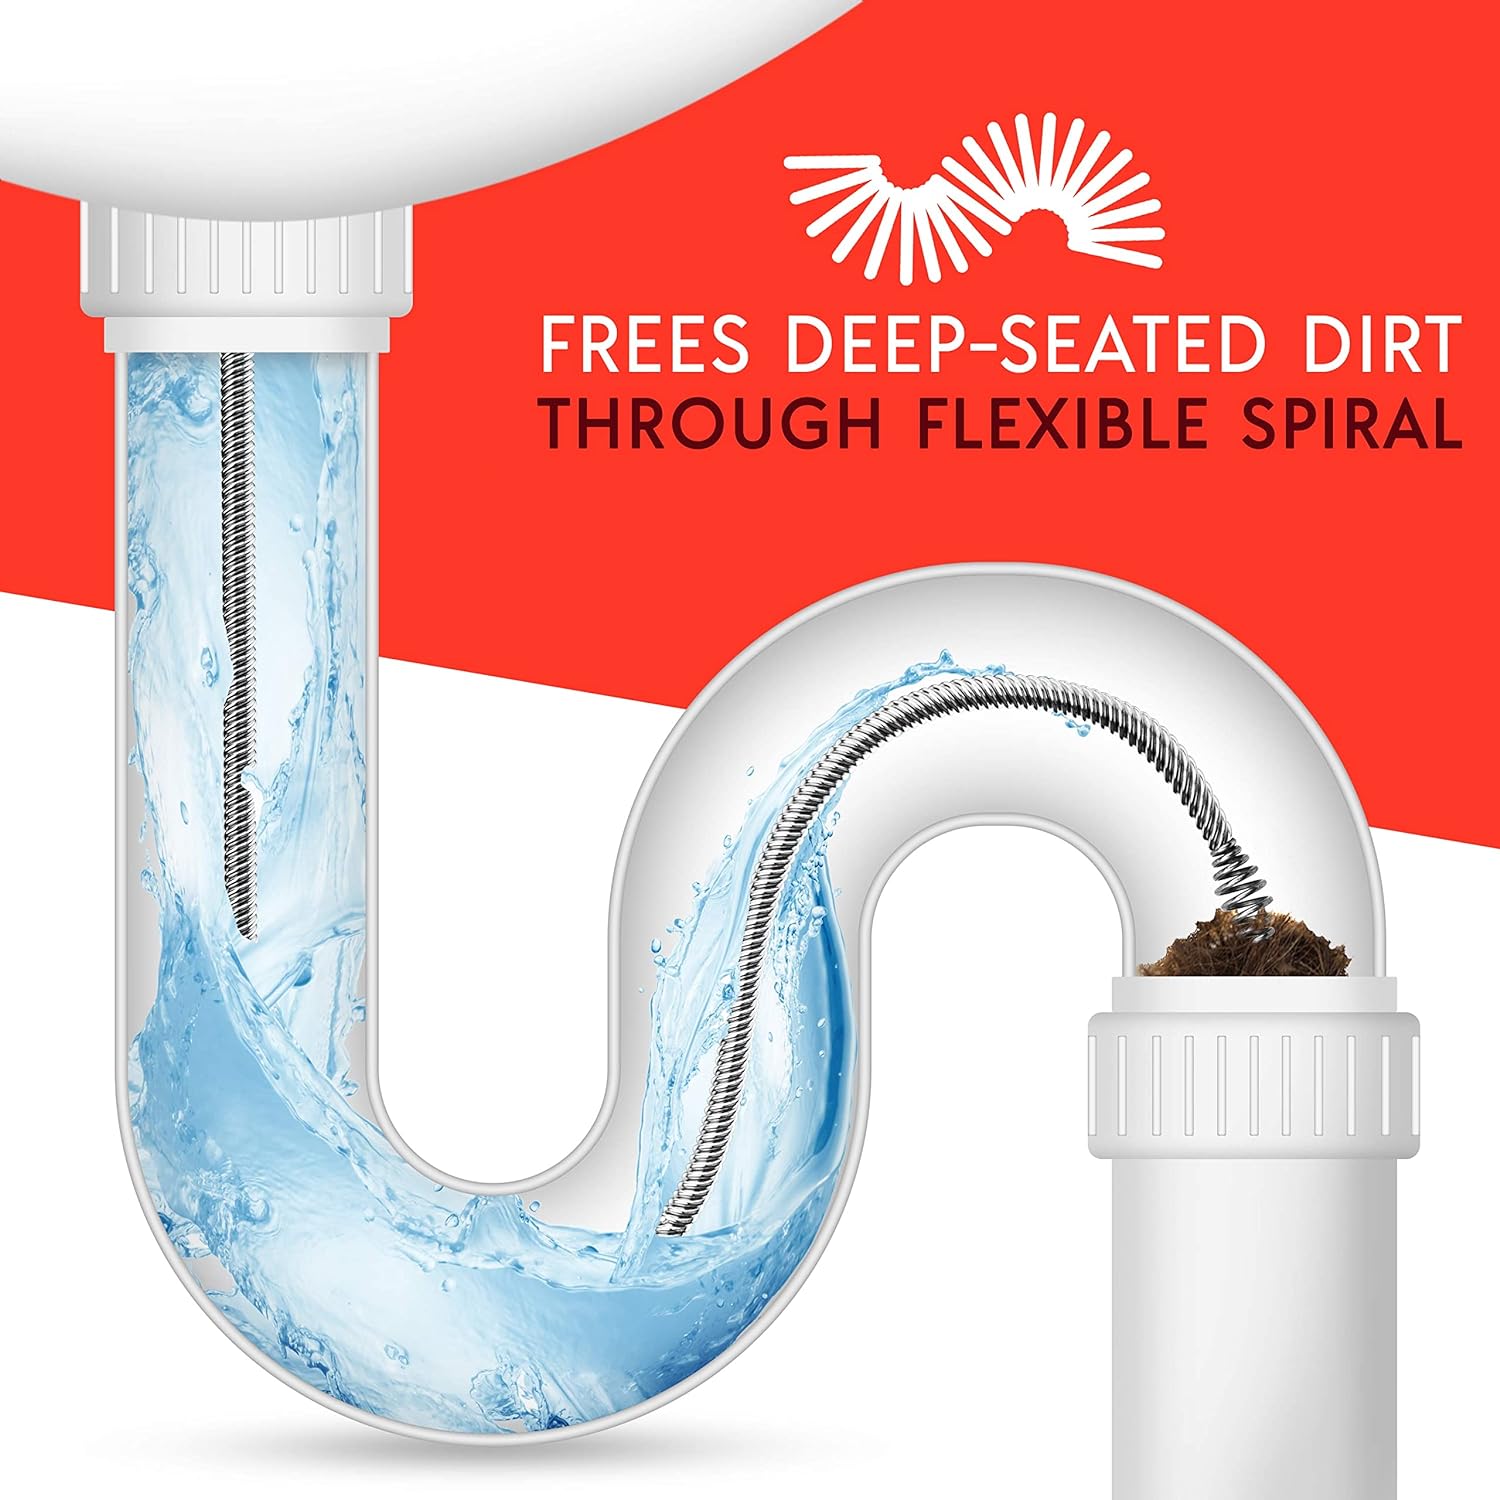 MEISTERFAKTUR drain snake [49 FT] - with drill attachment - Ideal plumbing snake for sink and drain unblocking - The drain auge